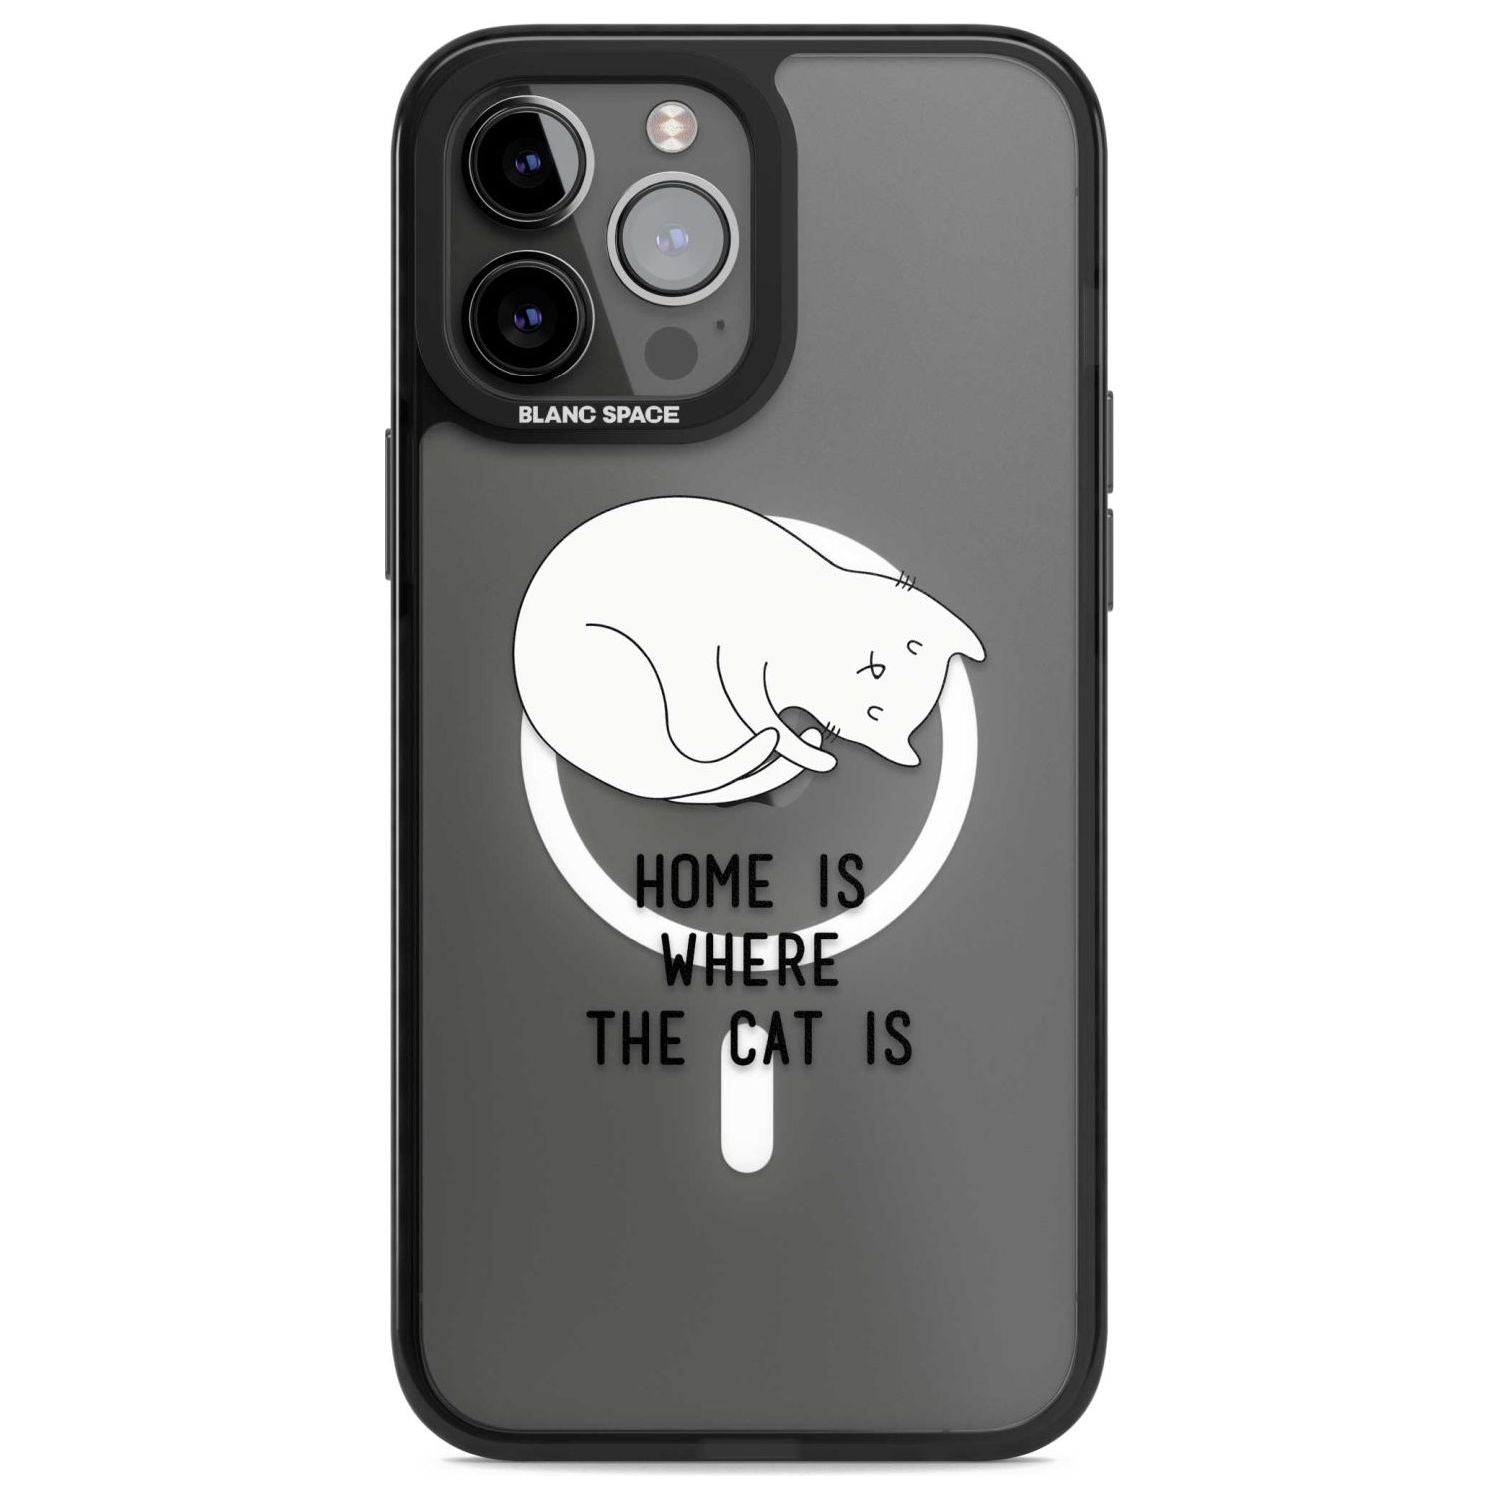 Home Is Where the Cat is Phone Case iPhone 13 Pro Max / Magsafe Black Impact Case Blanc Space